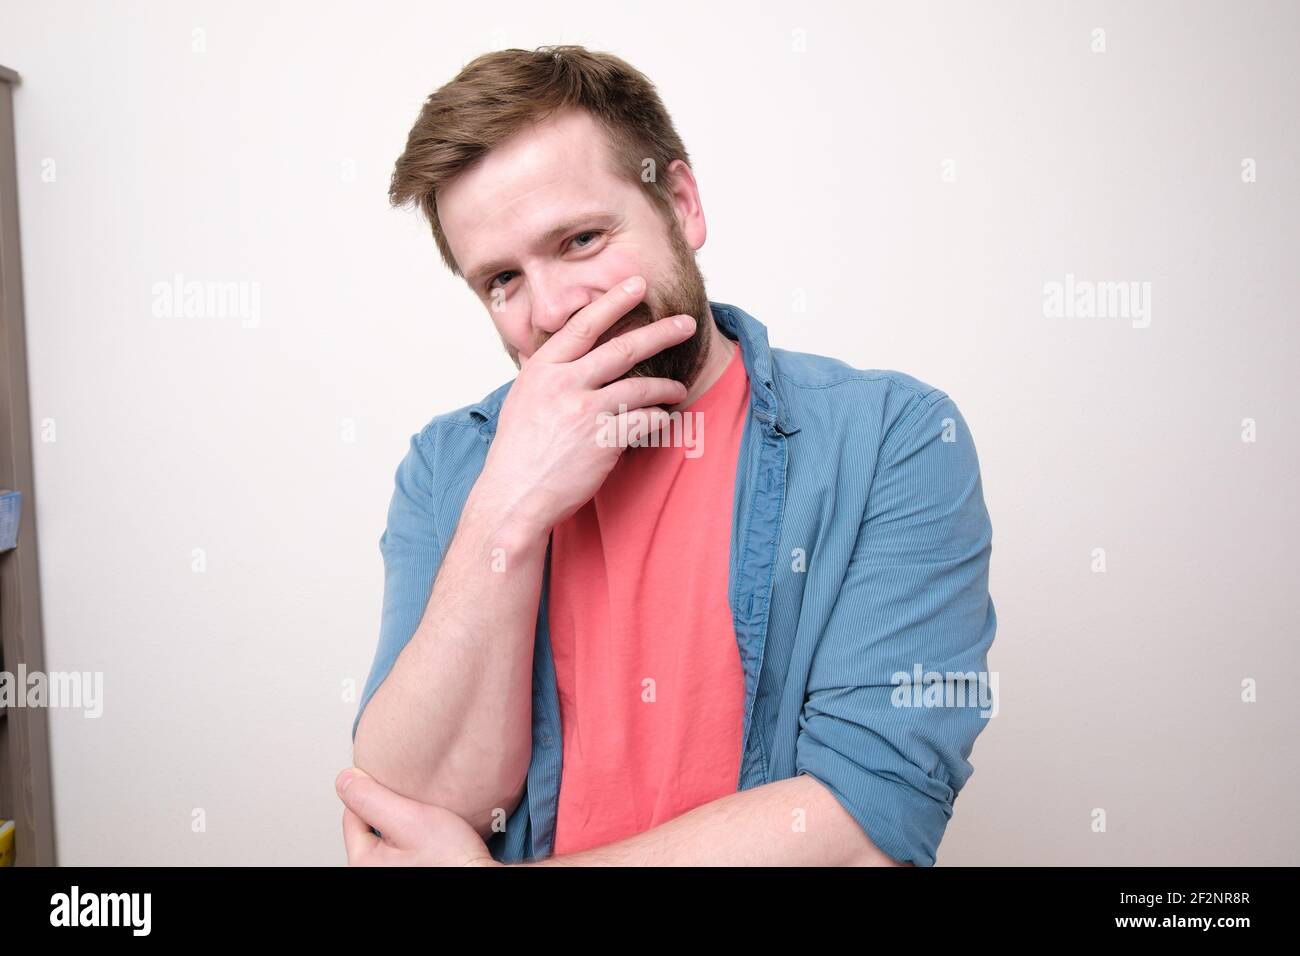 Shy, happy man smiles while covering his mouth with his hand. White background. Stock Photo